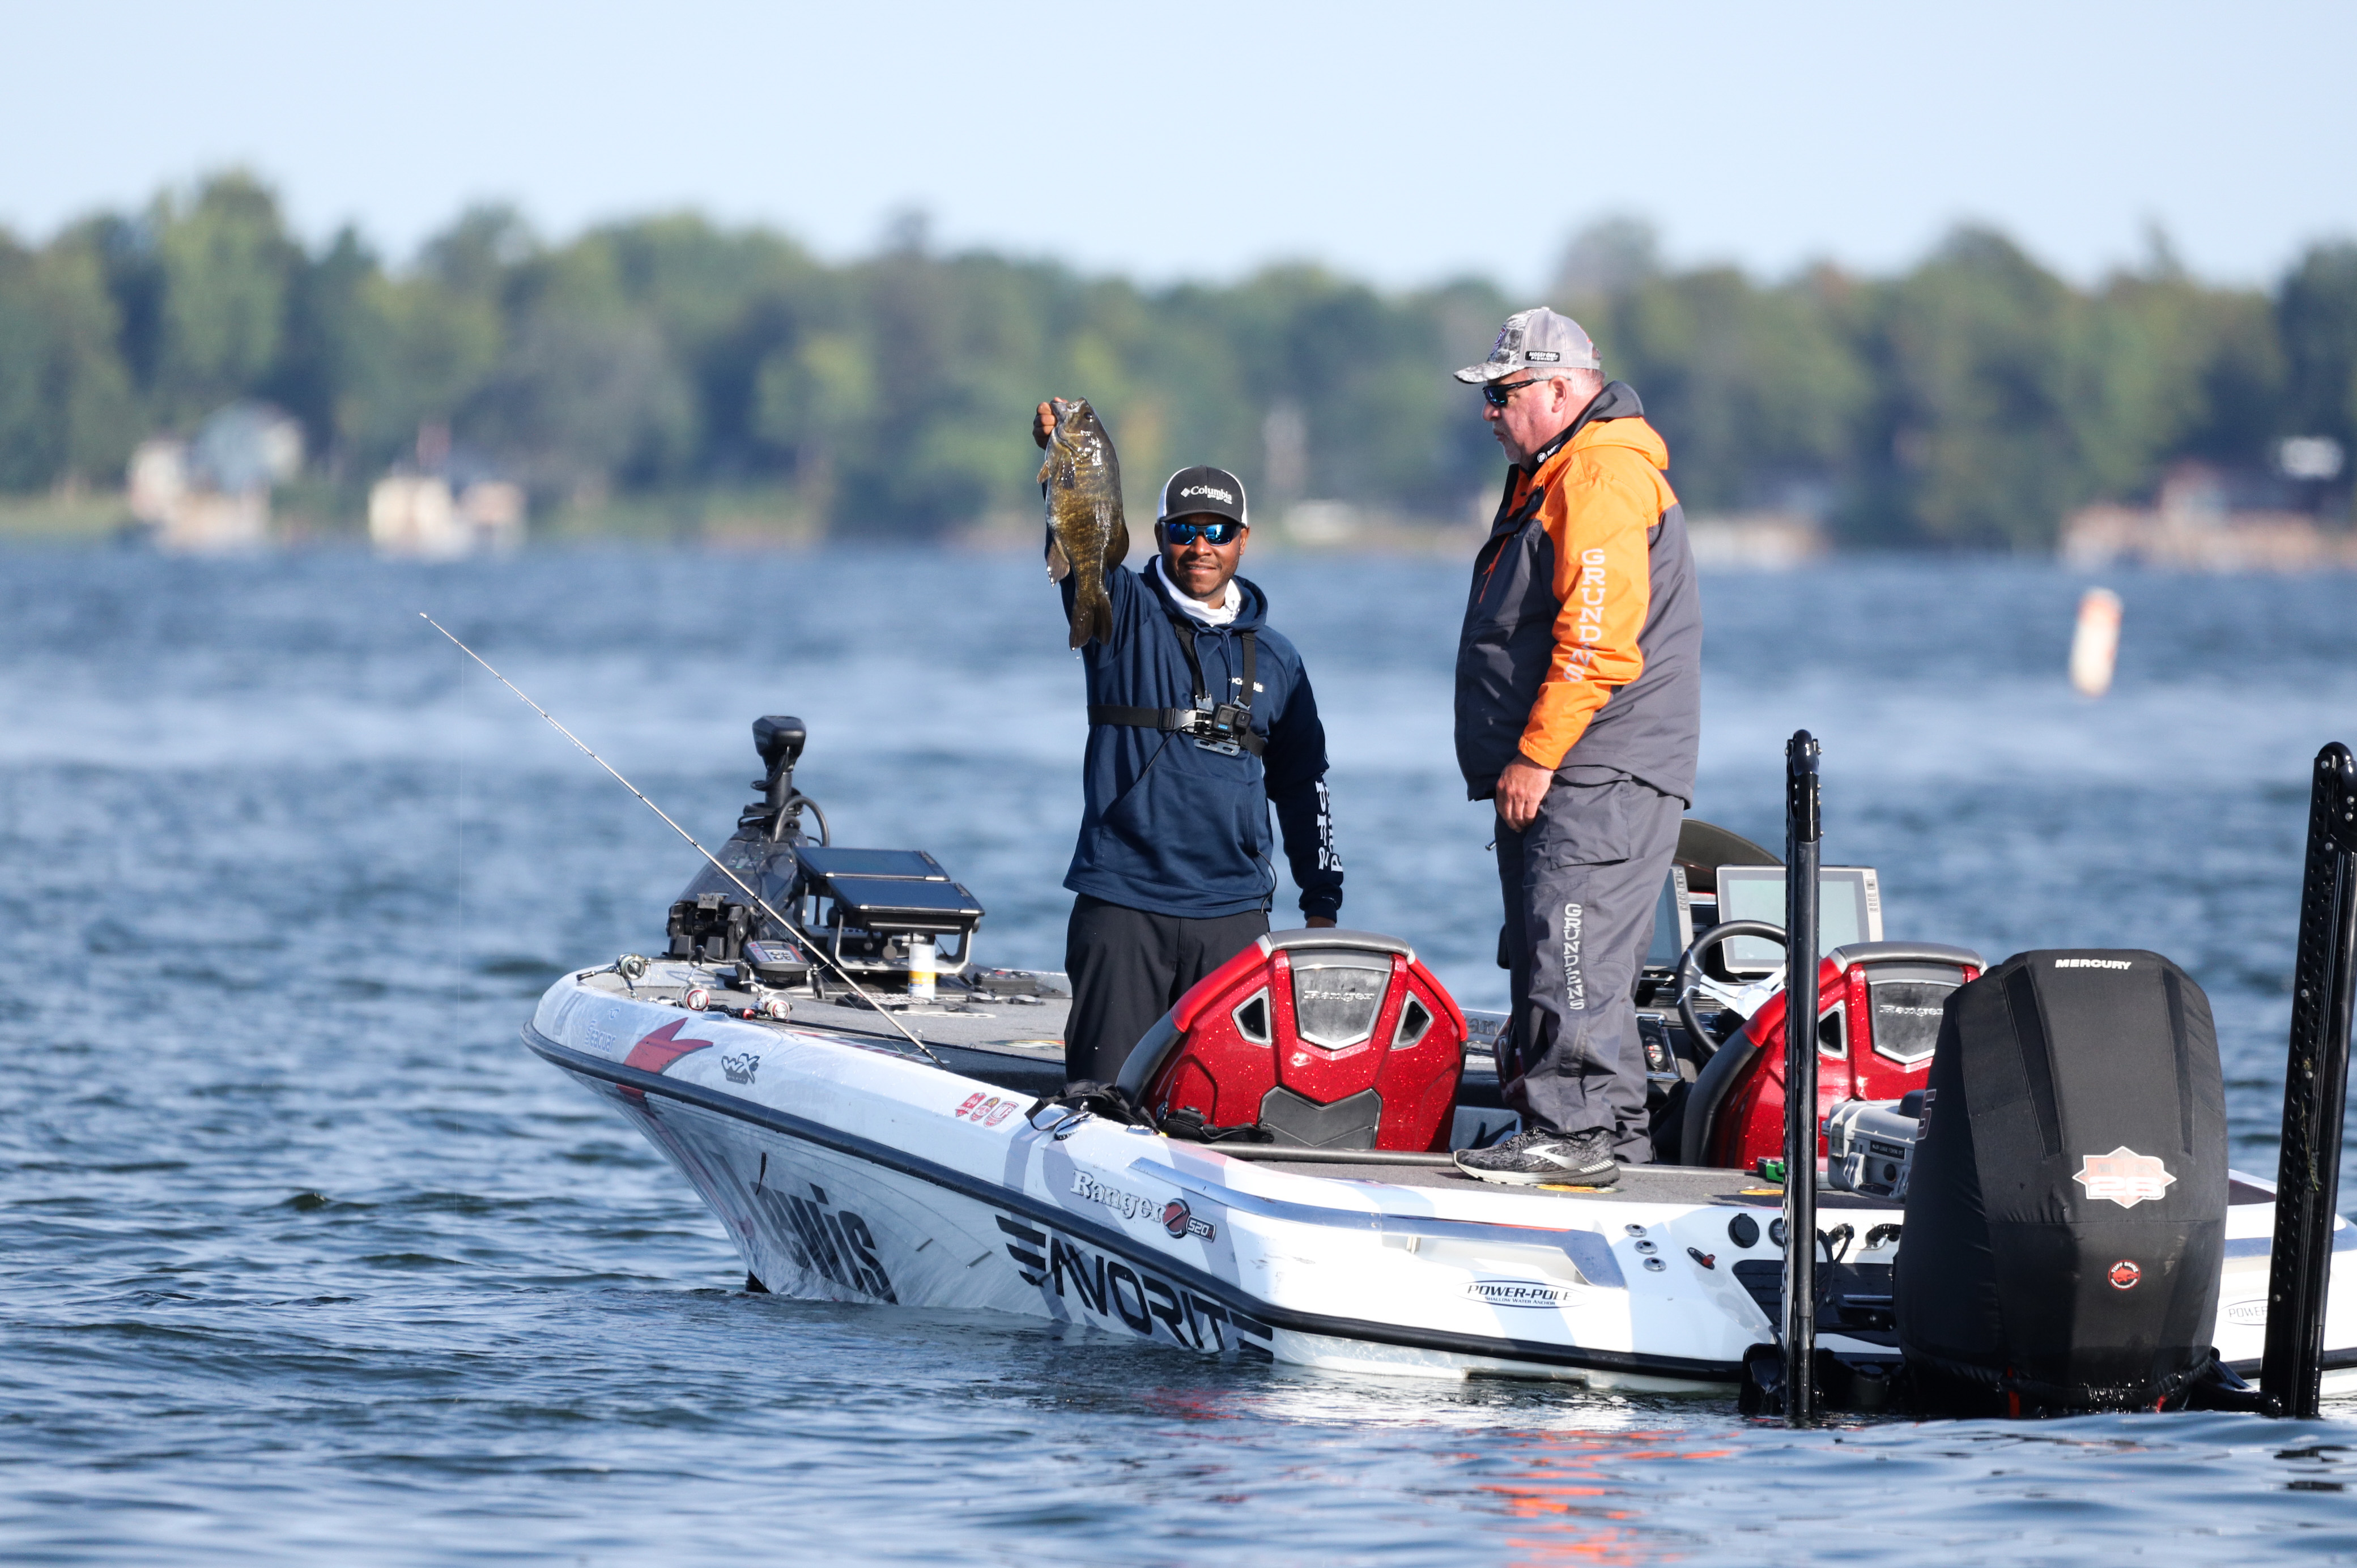 MDJ Rallies From 43 Pounds Back to Win Qualifying Round at Bass